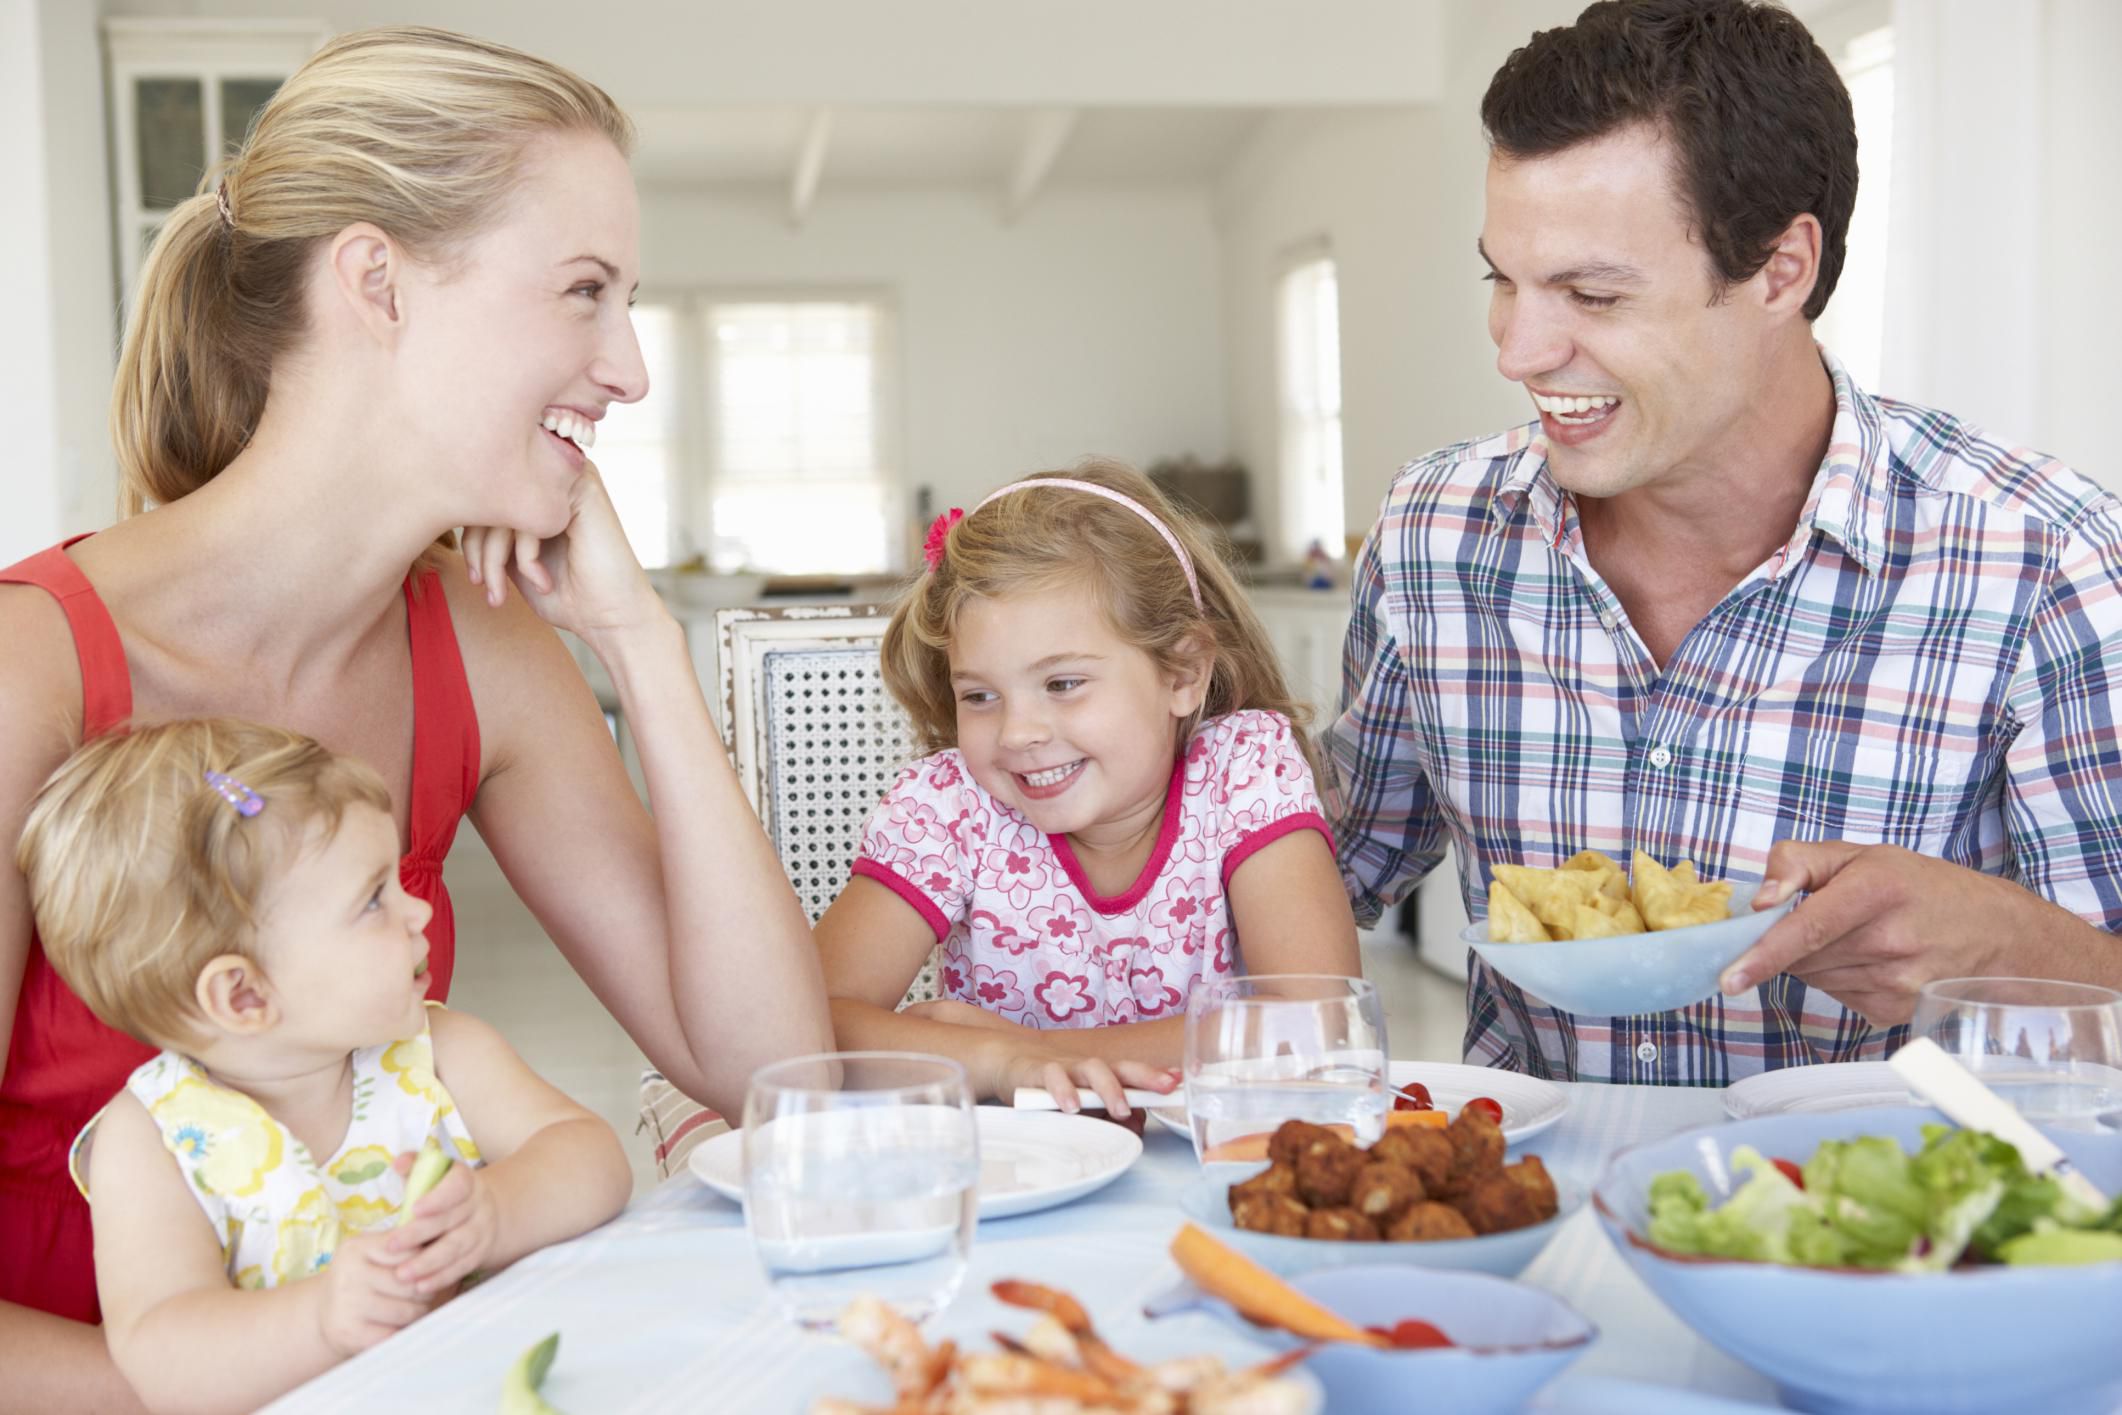 Which Table Manners Should You Teach Your Kids Today?